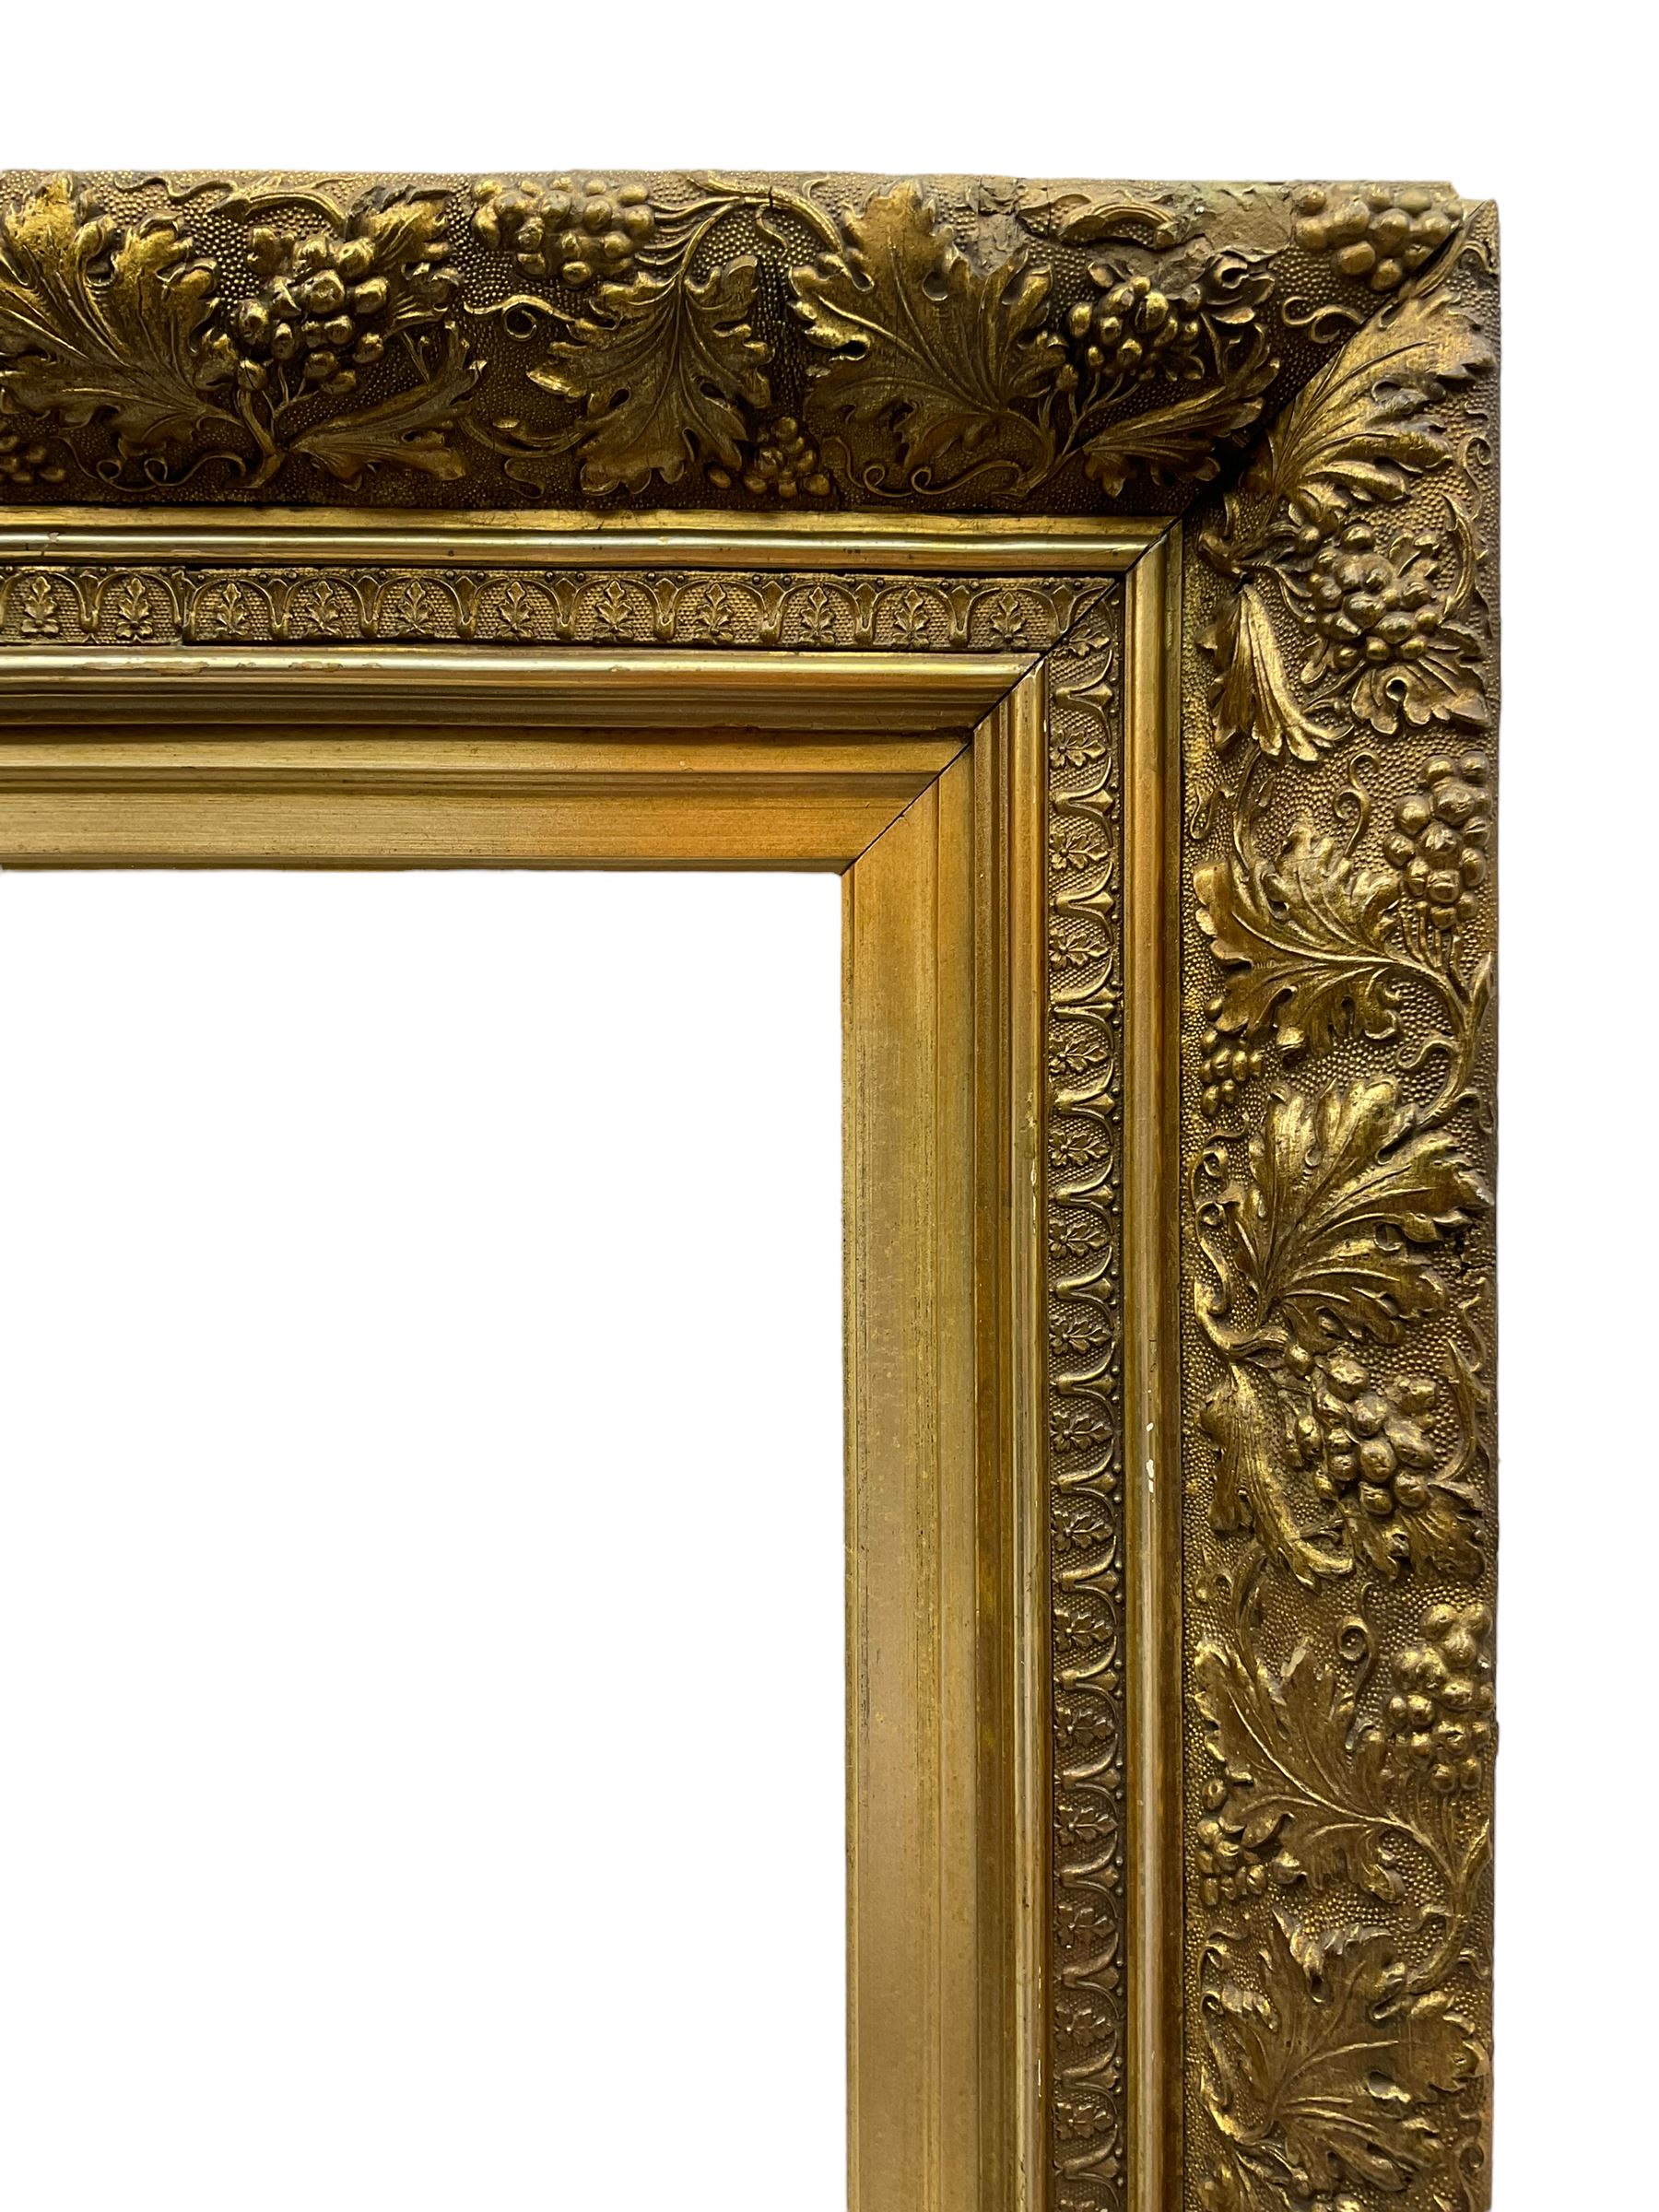 Frames - Gilt moulded with fruiting vines aperture to fit painting 61cm x 51cm (24" x 20") - Image 2 of 2